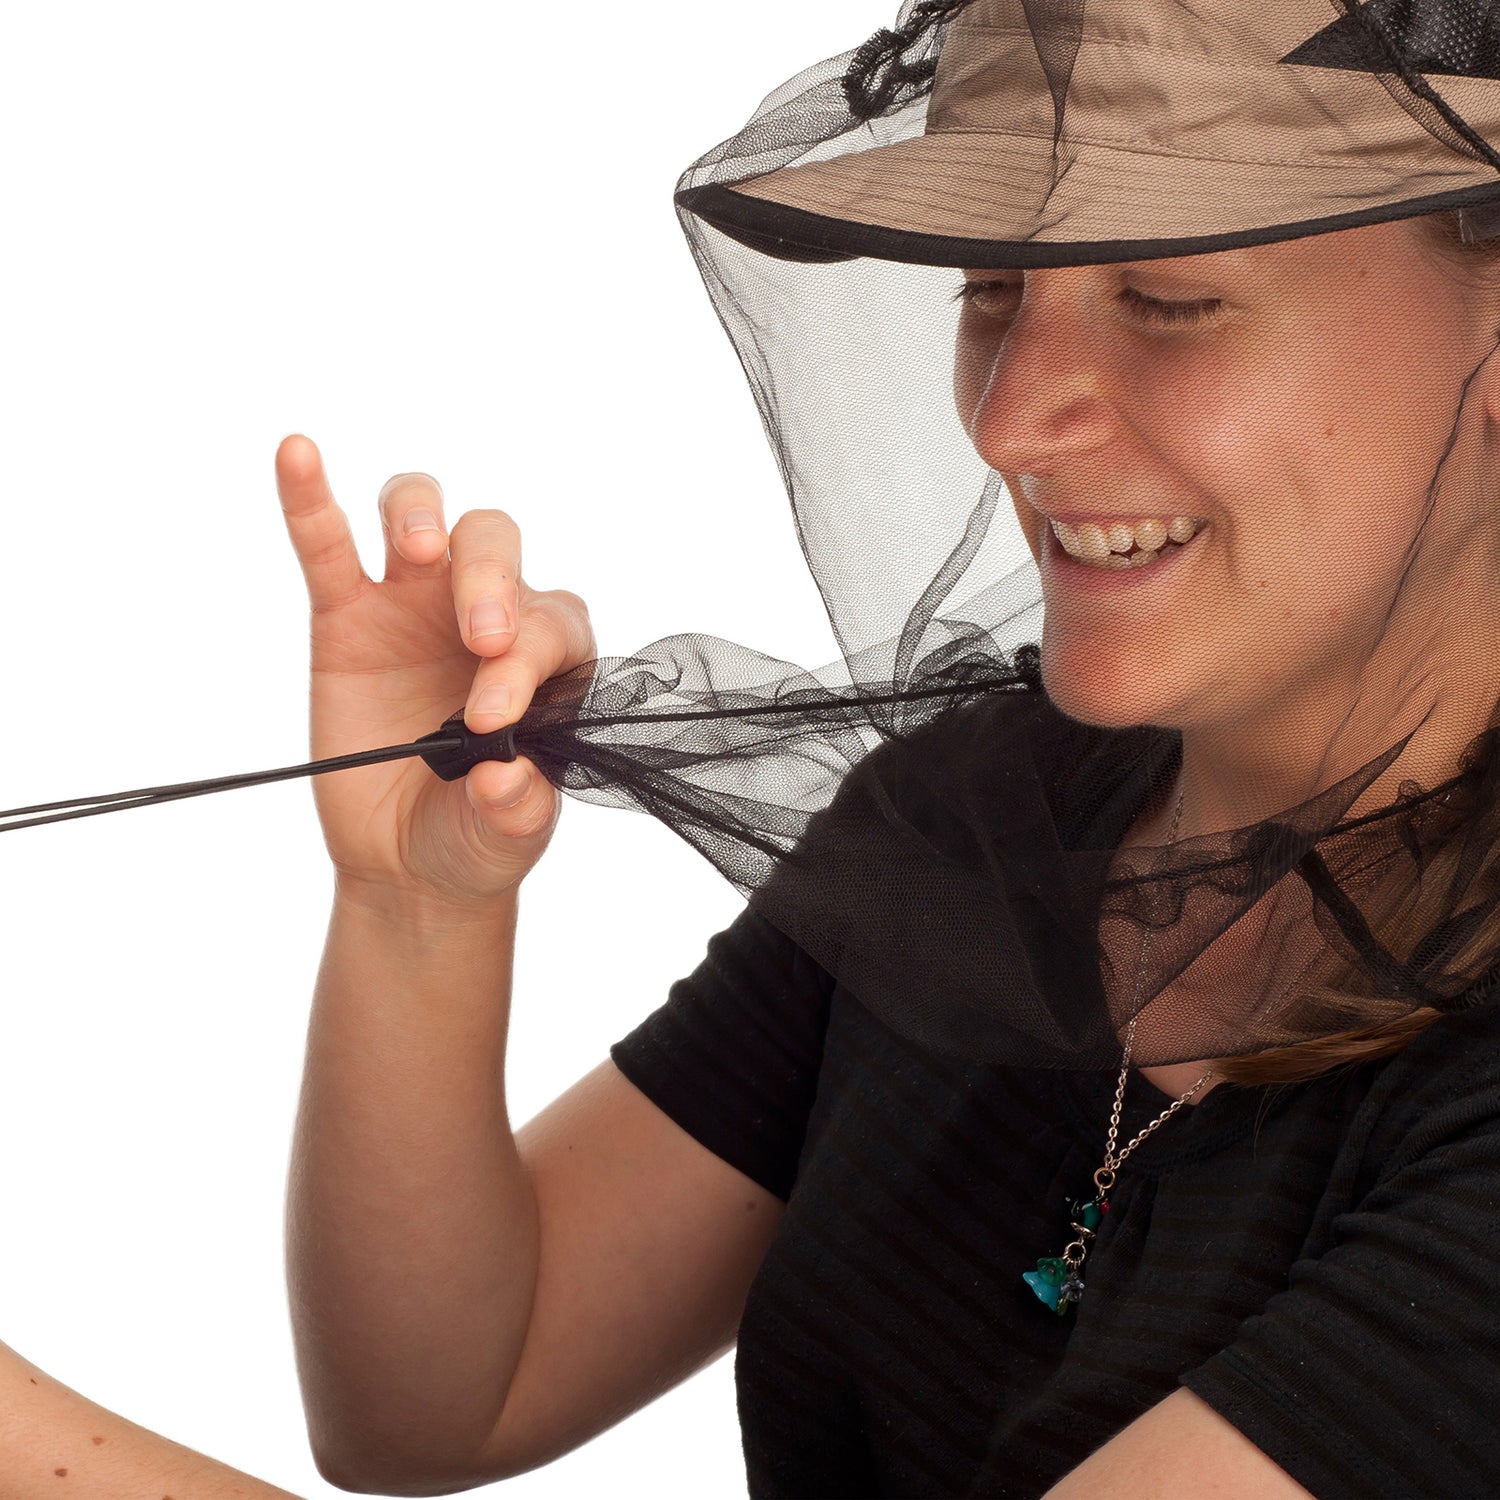 ROBOT-GXG Mosquito Head Net Hat Mesh Protection Bugs India